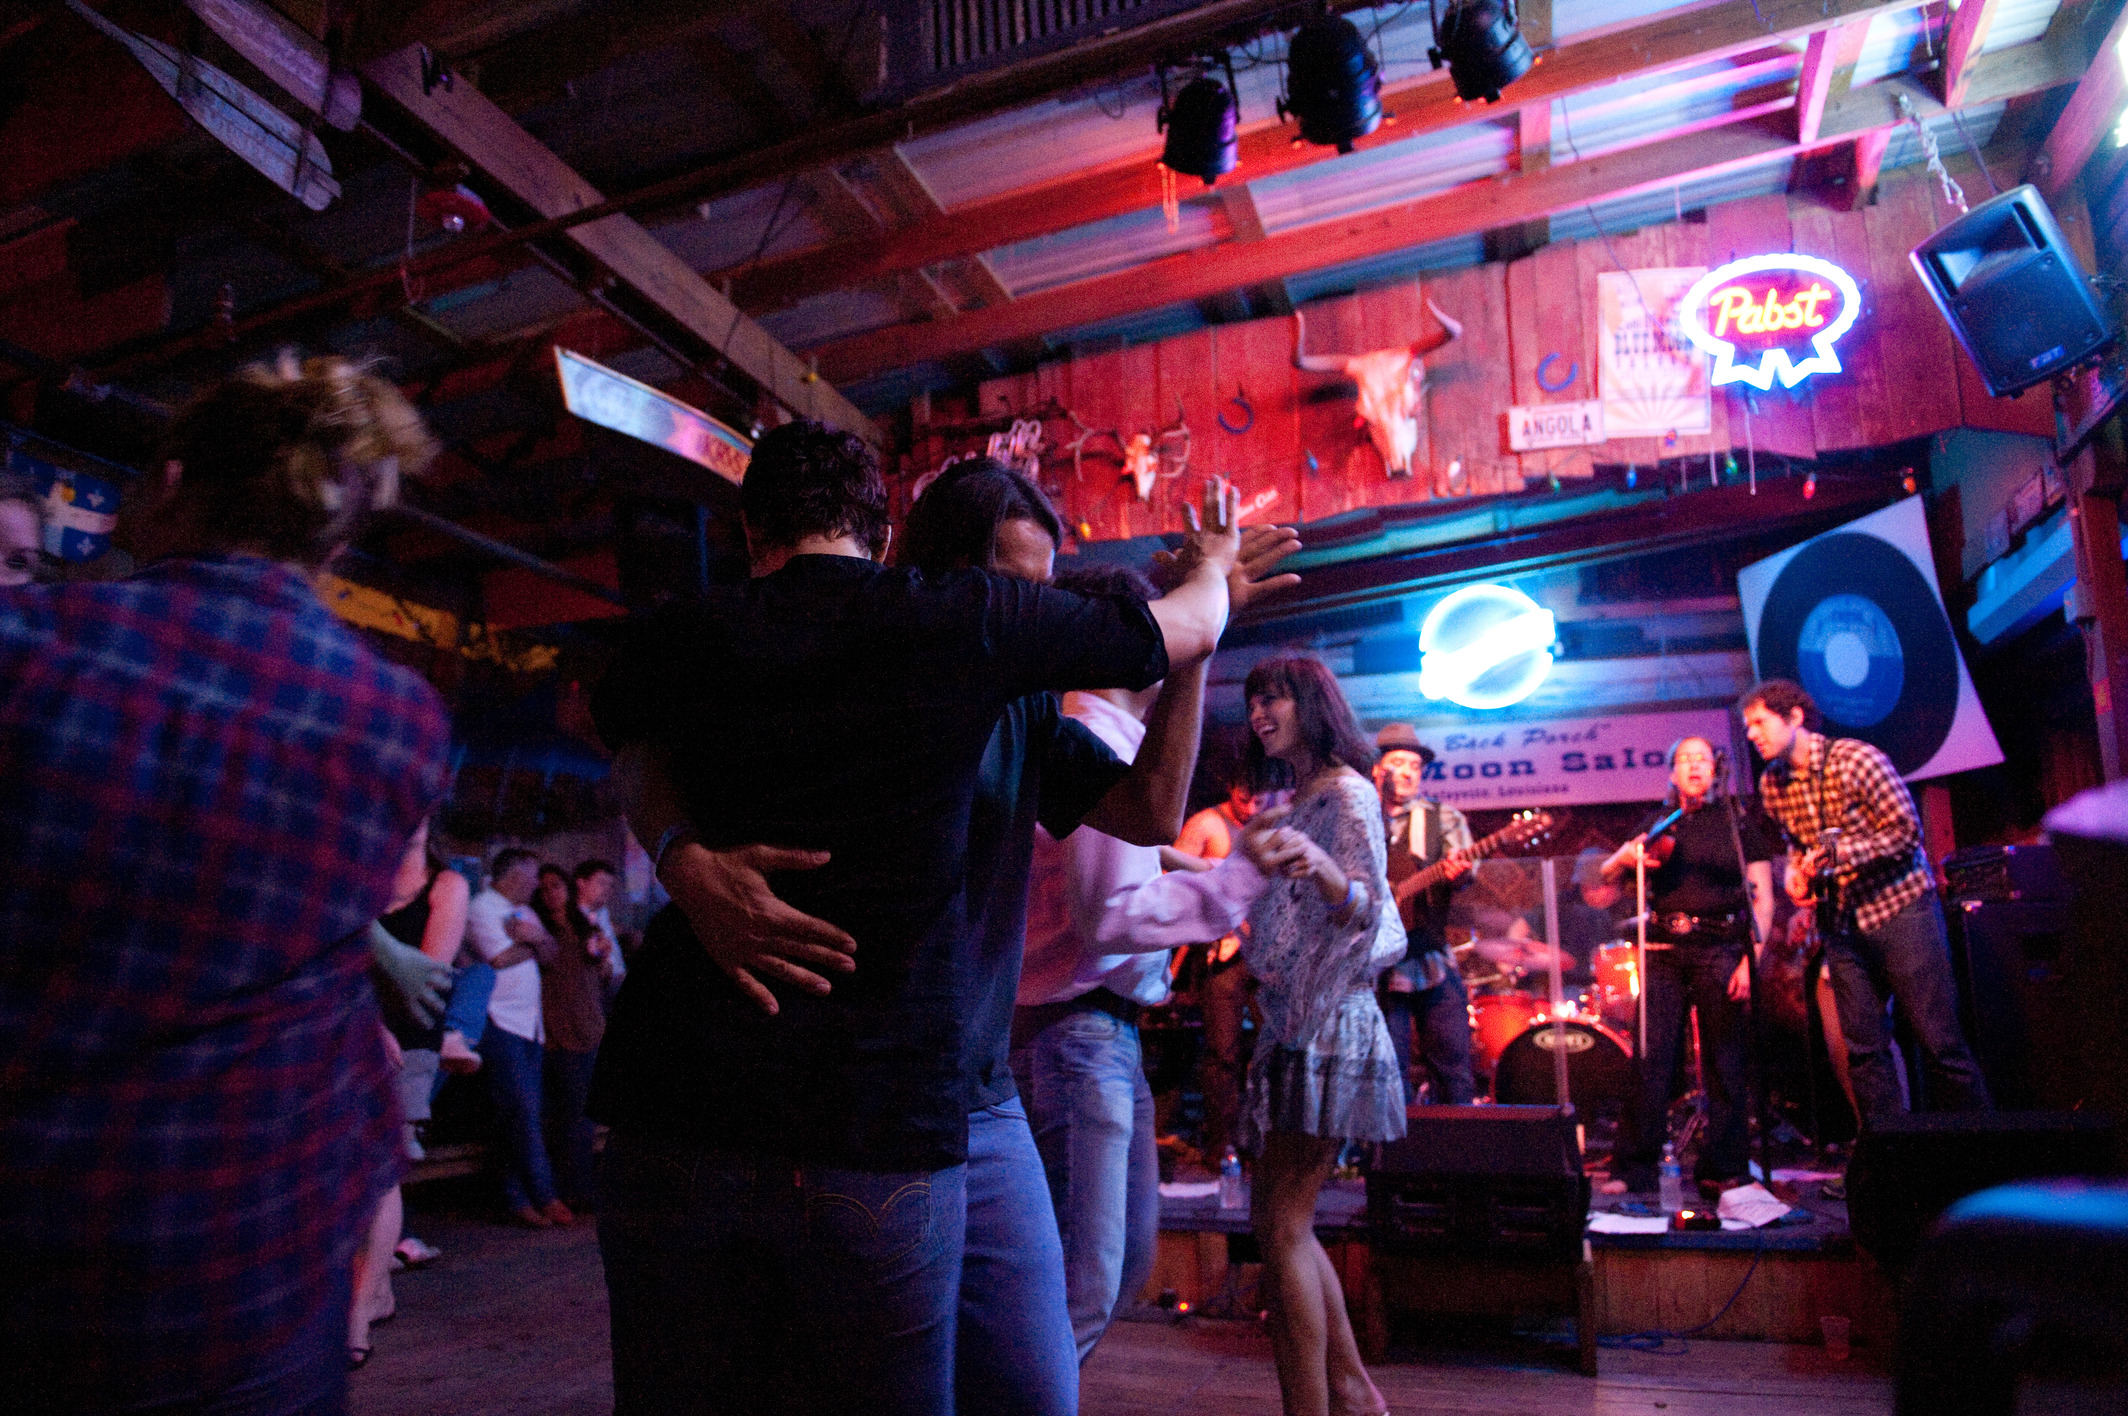 Blue Moon Saloon Live Music and Dancing